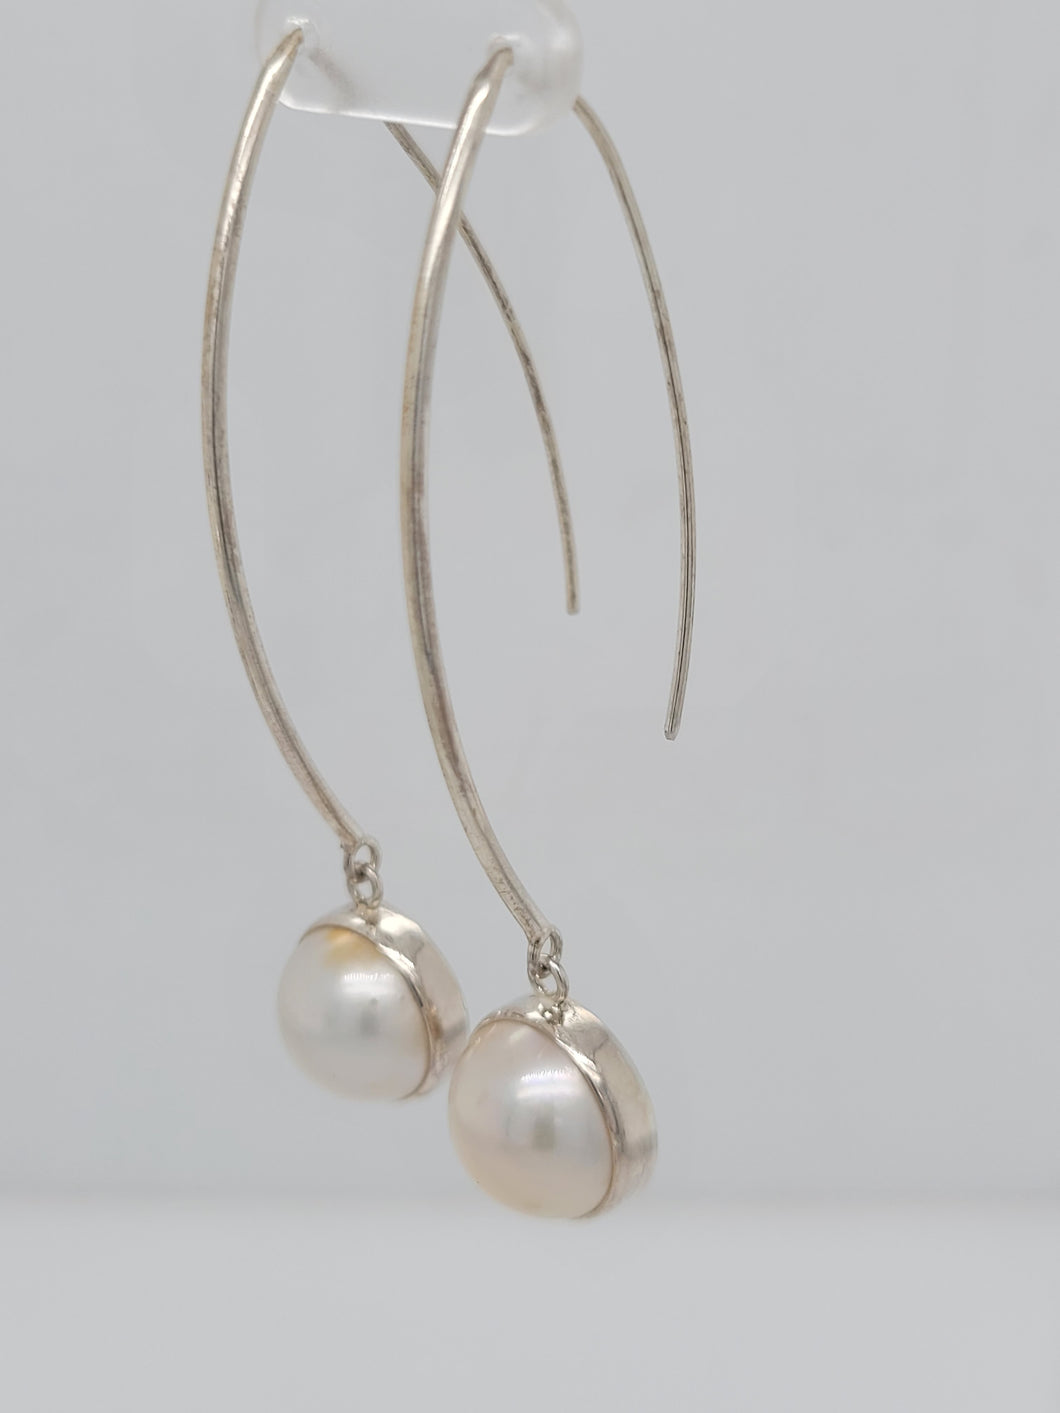 Sterling Silver and Pearl Long Dangle Earring